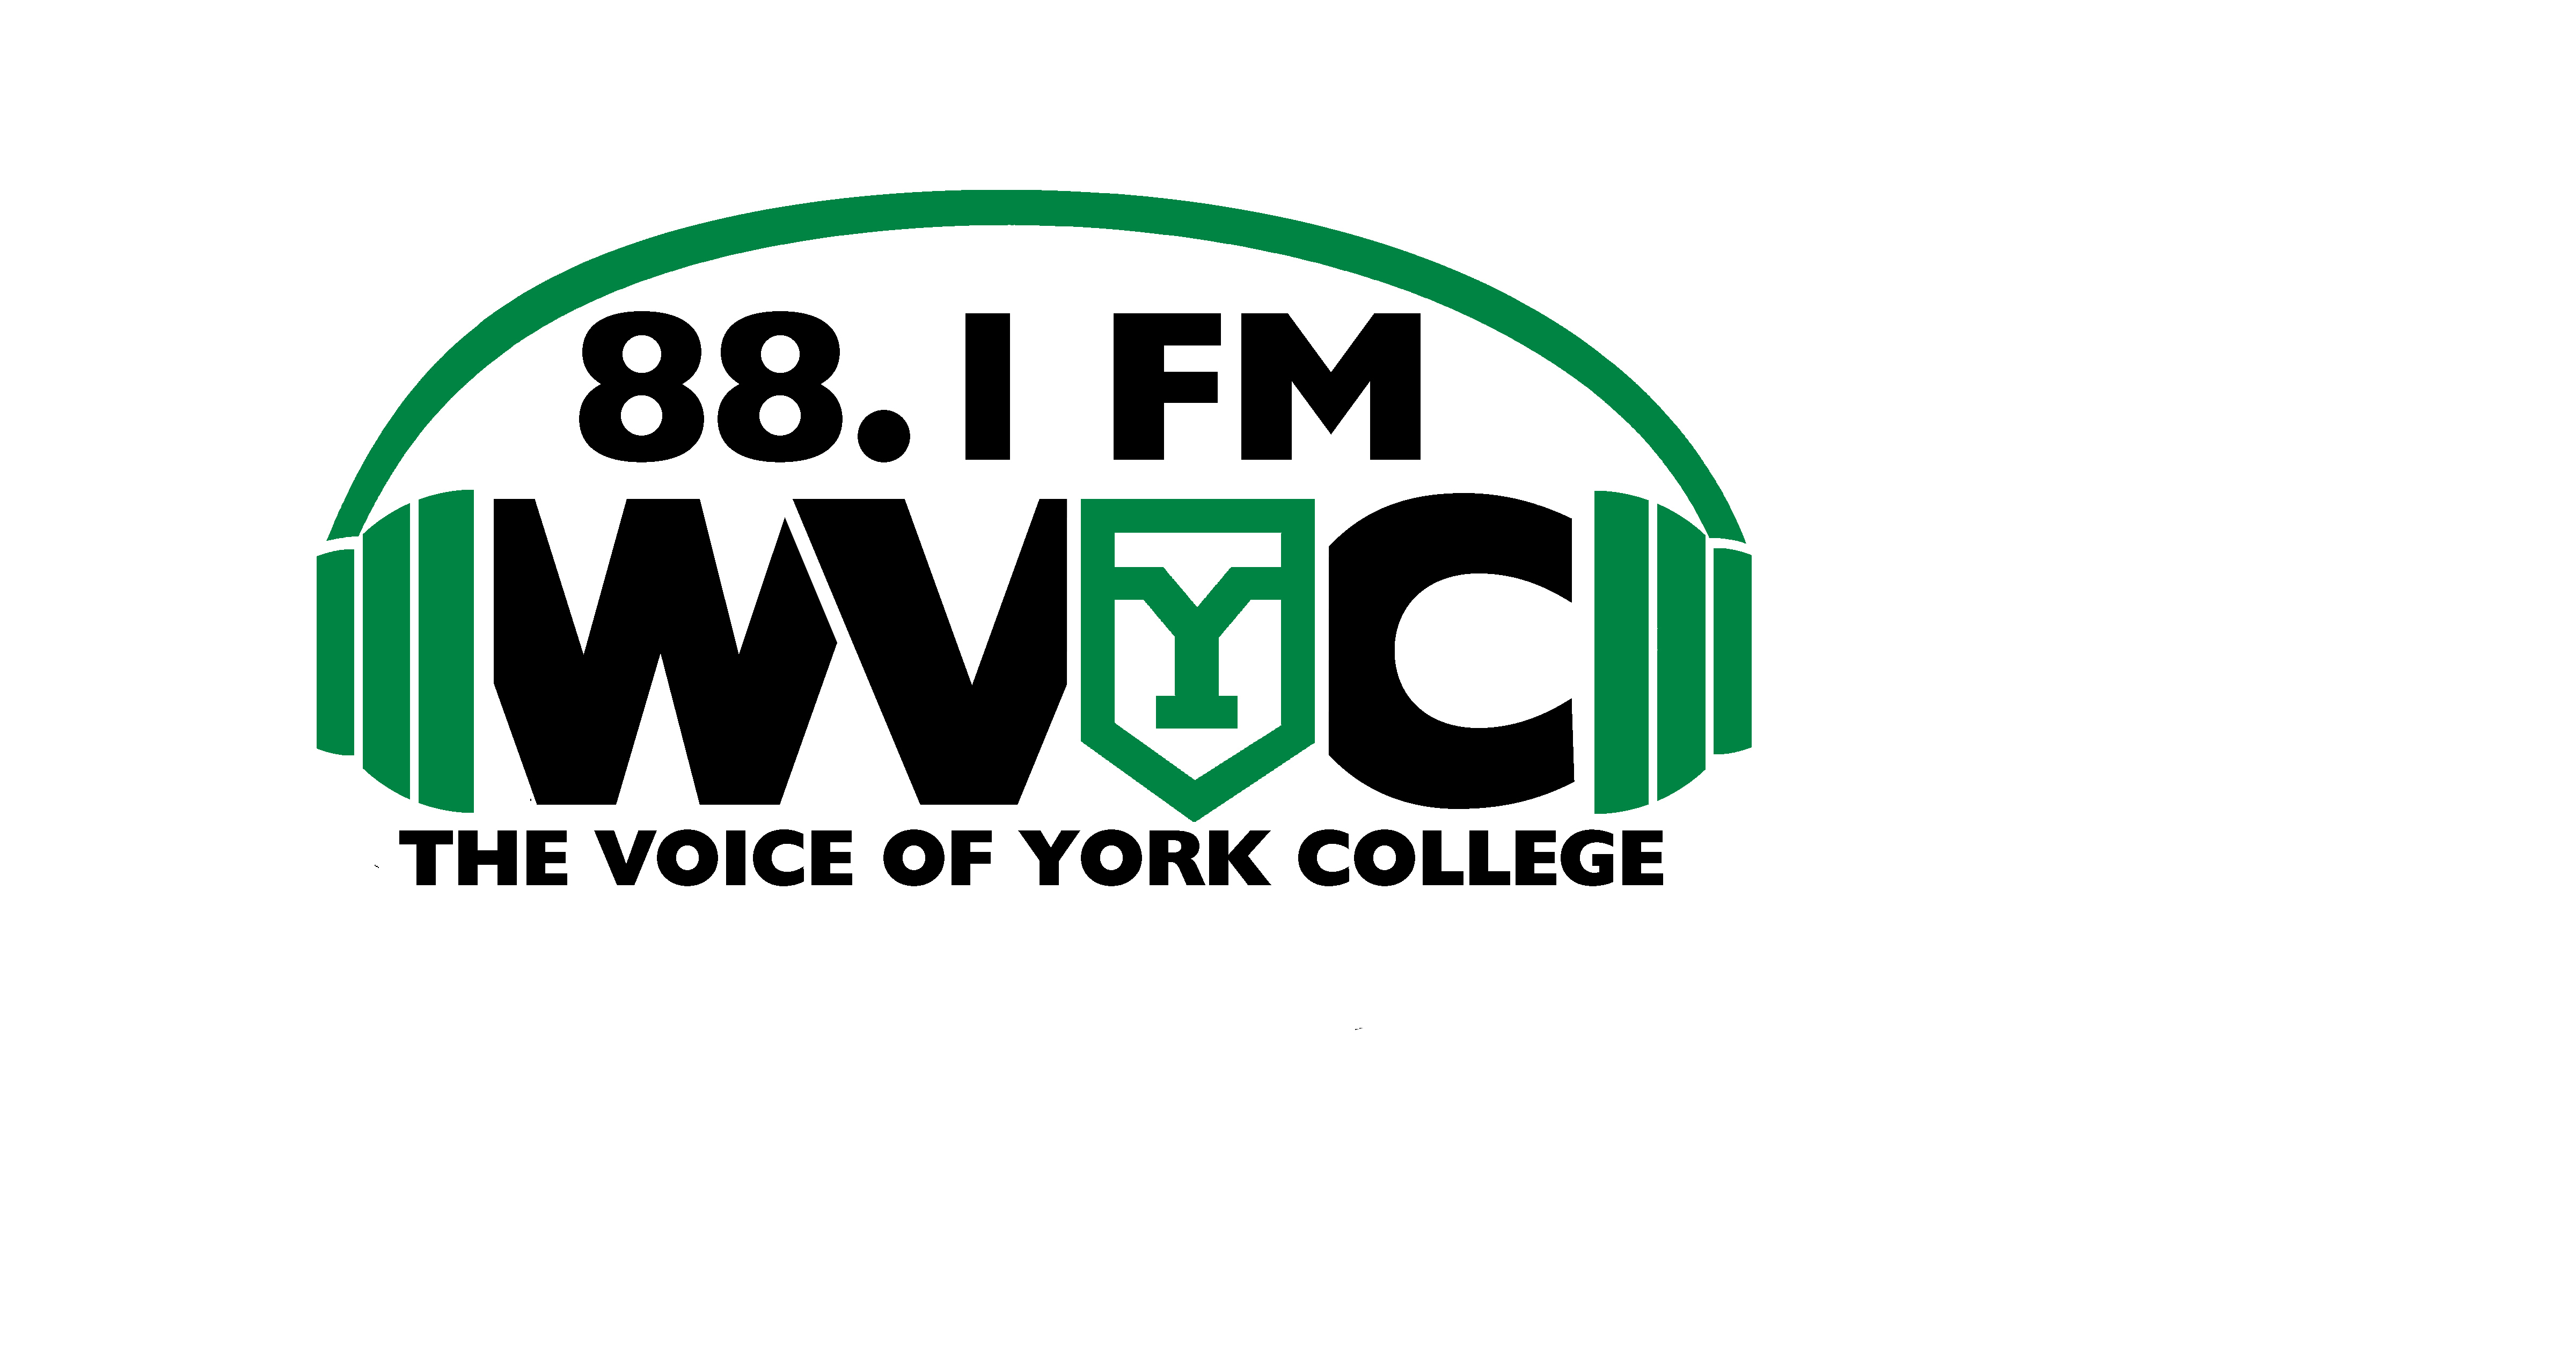 WVYC-FM The Voice of York College